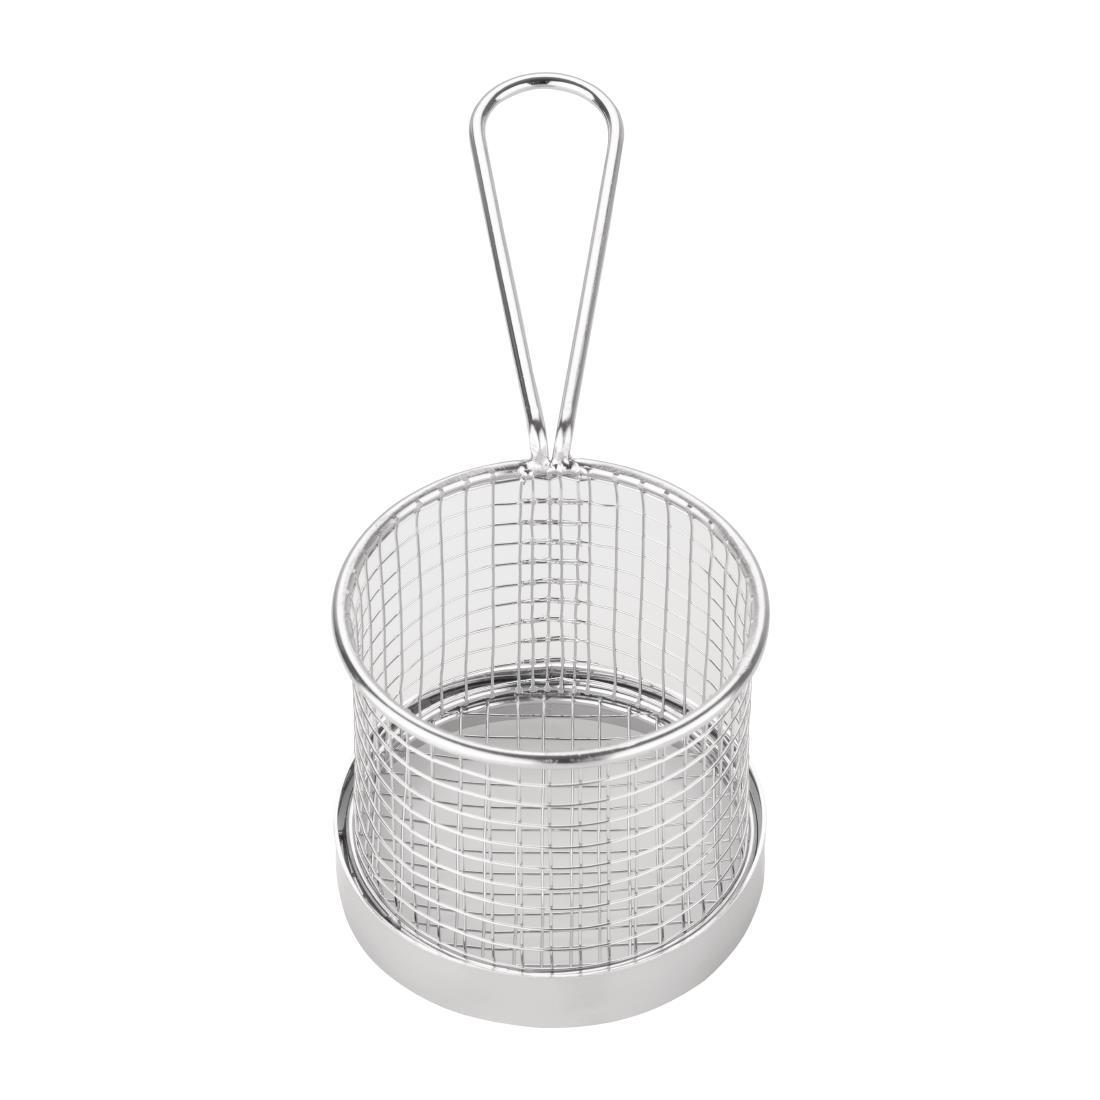 Olympia Chip Basket round with Handle 95mm - GG875  - 5